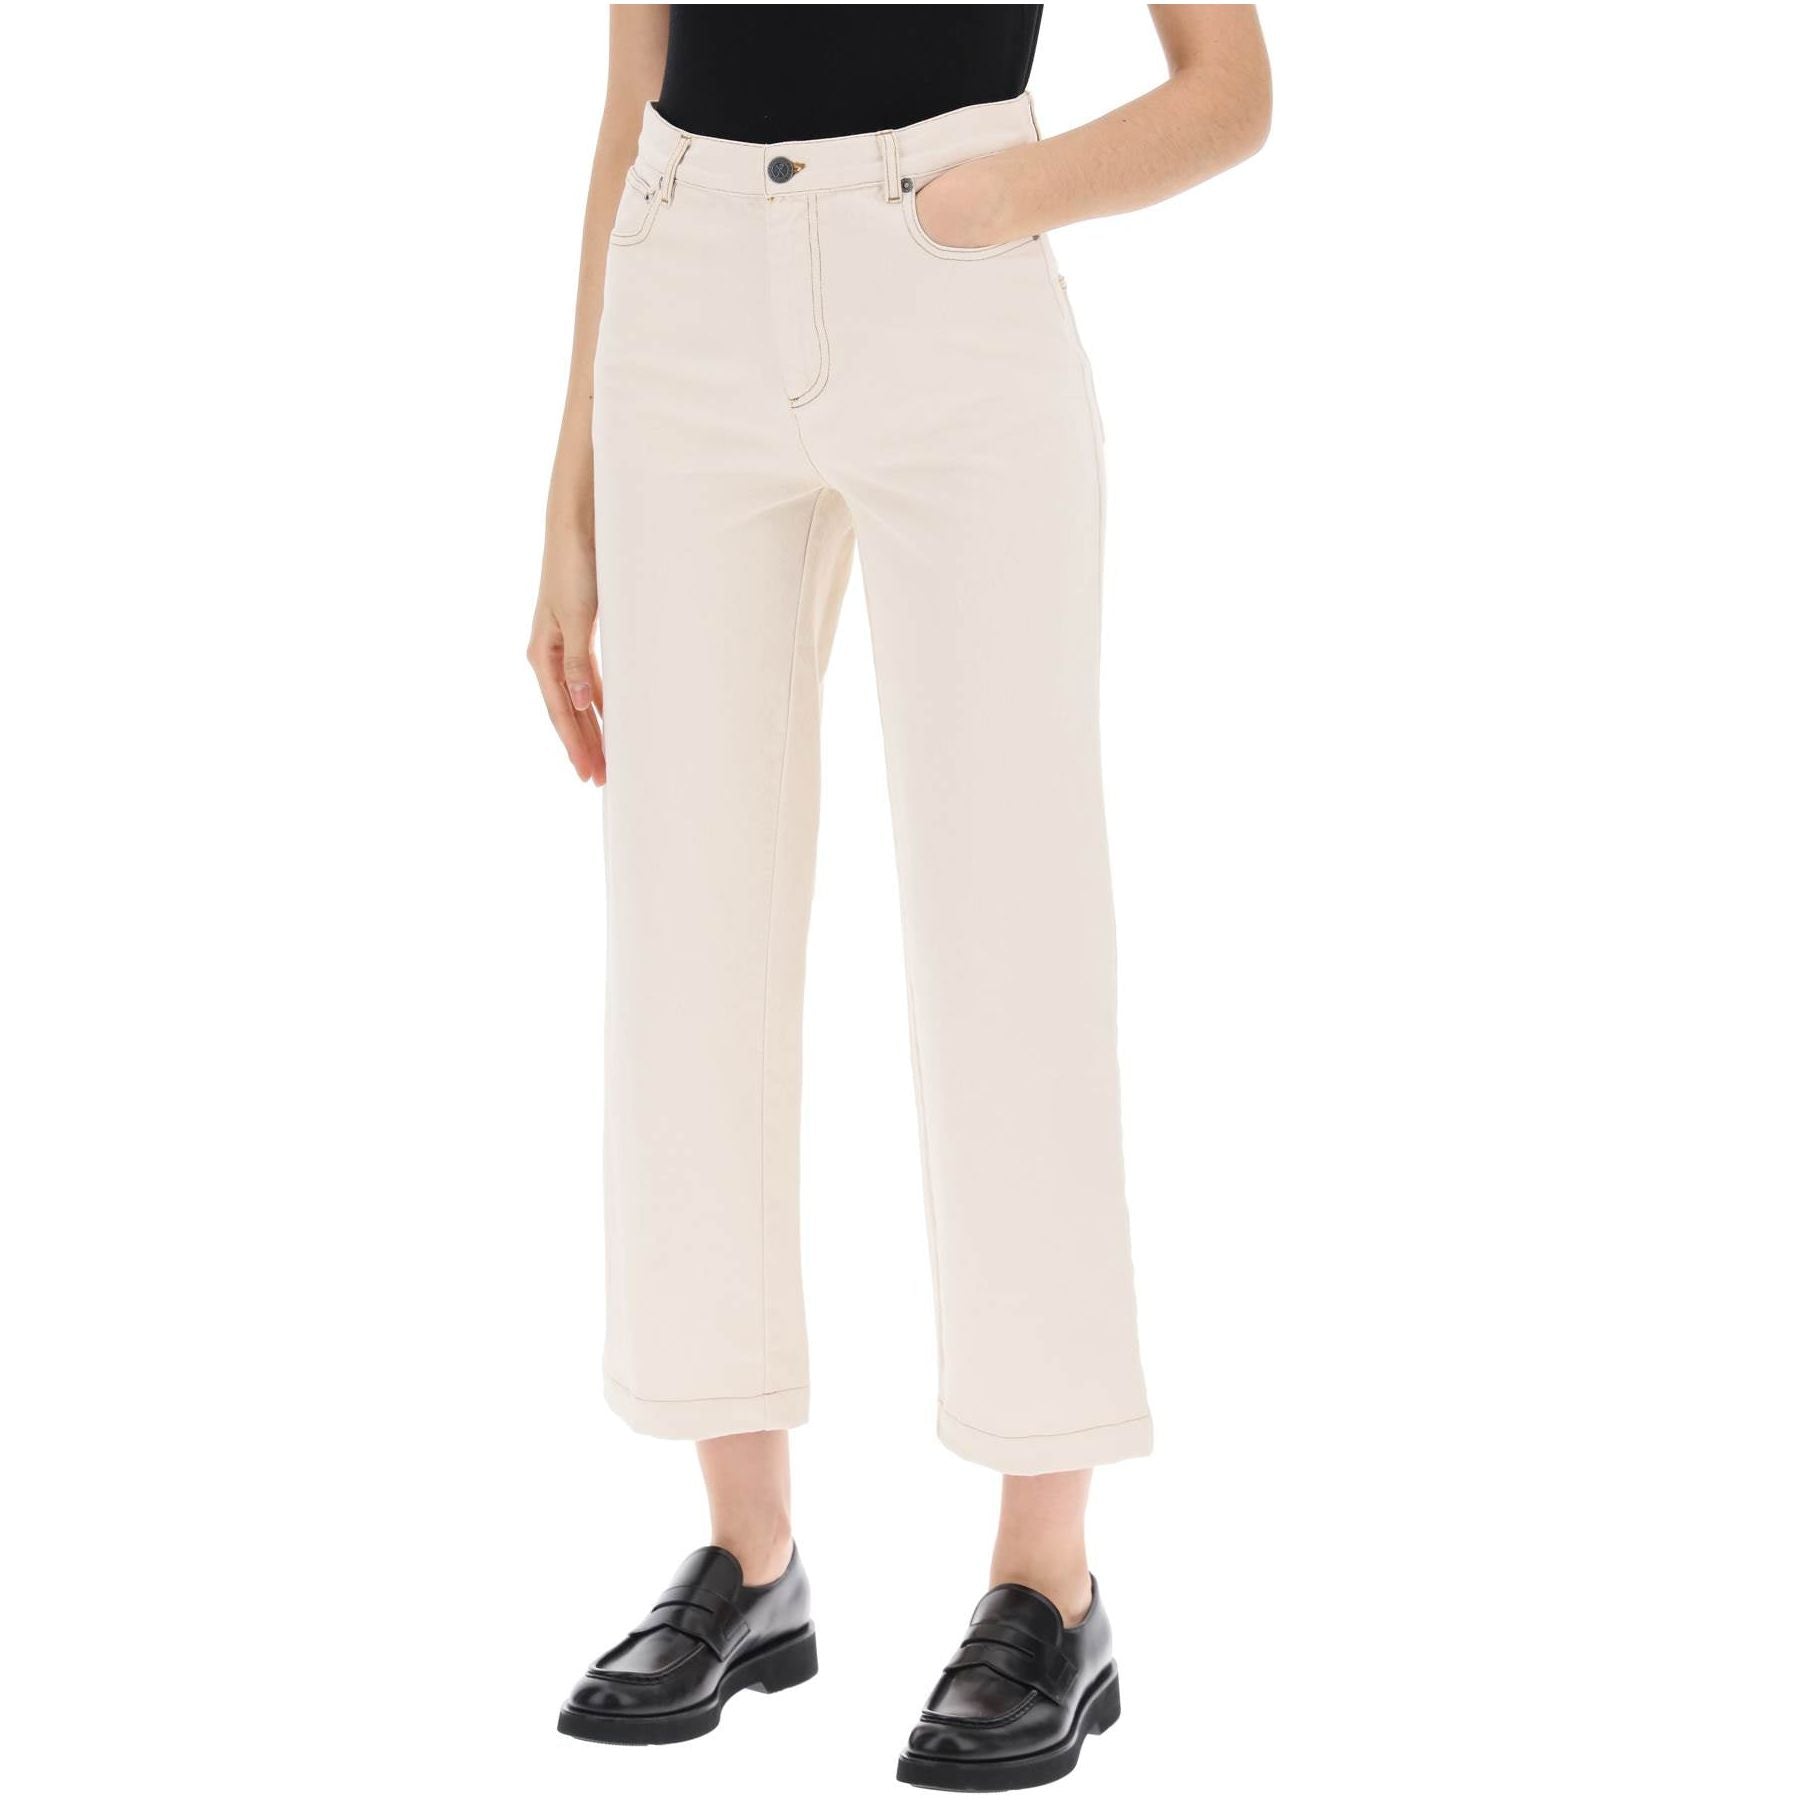 New Sailor Cropped Jeans